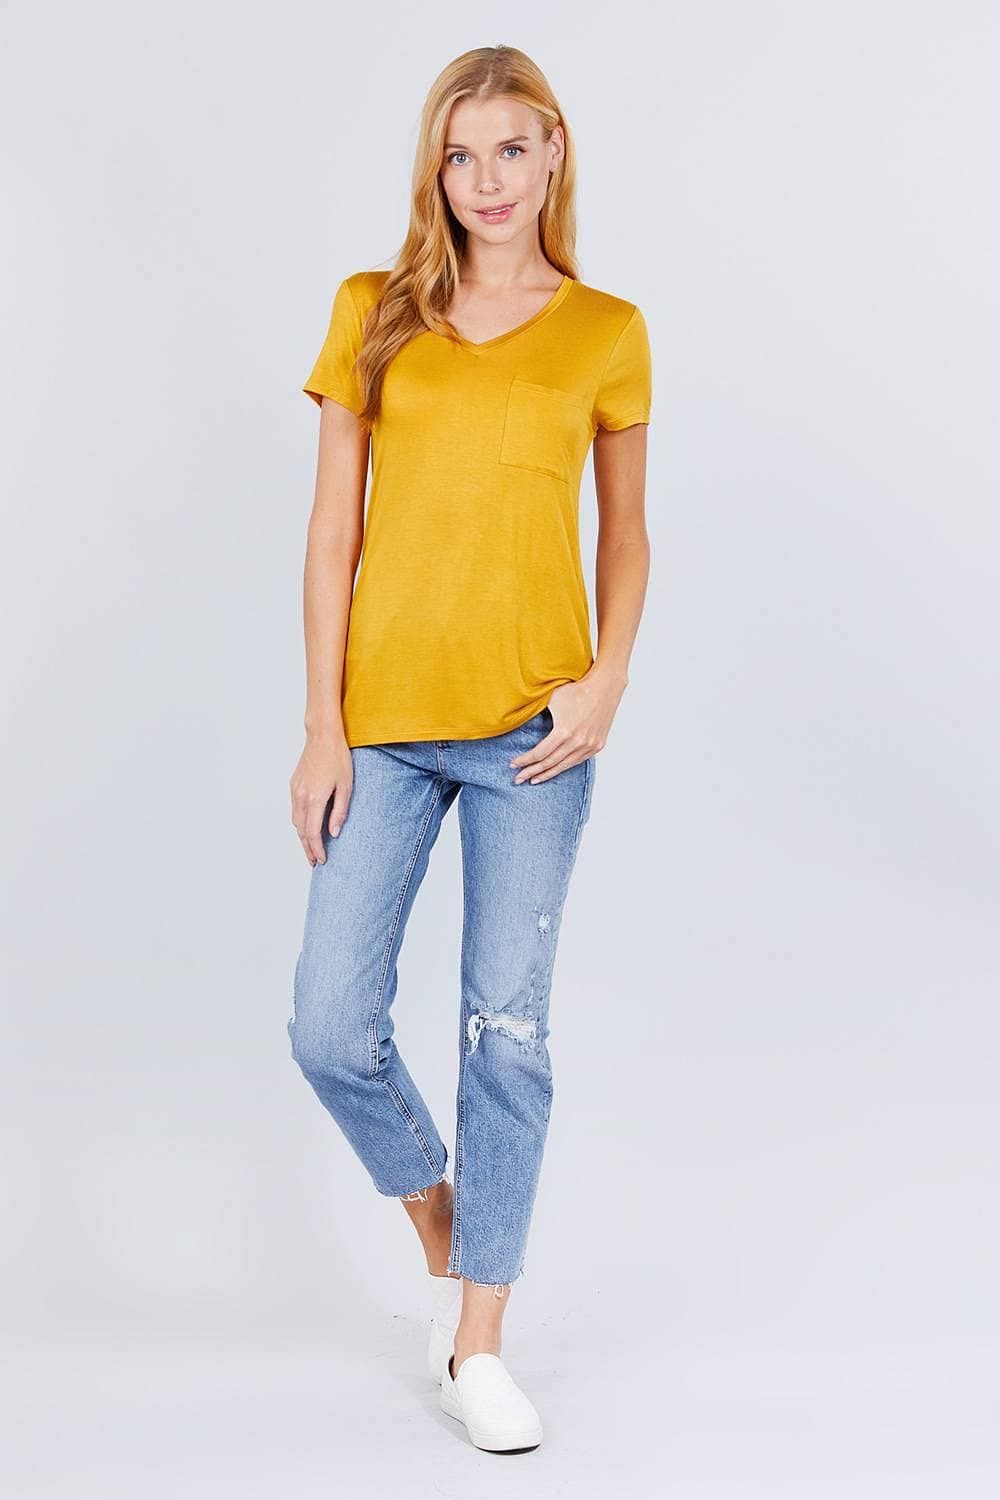 Mustard Short Sleeve V-Neck Rayon Jersey - Shopping Therapy M Tops